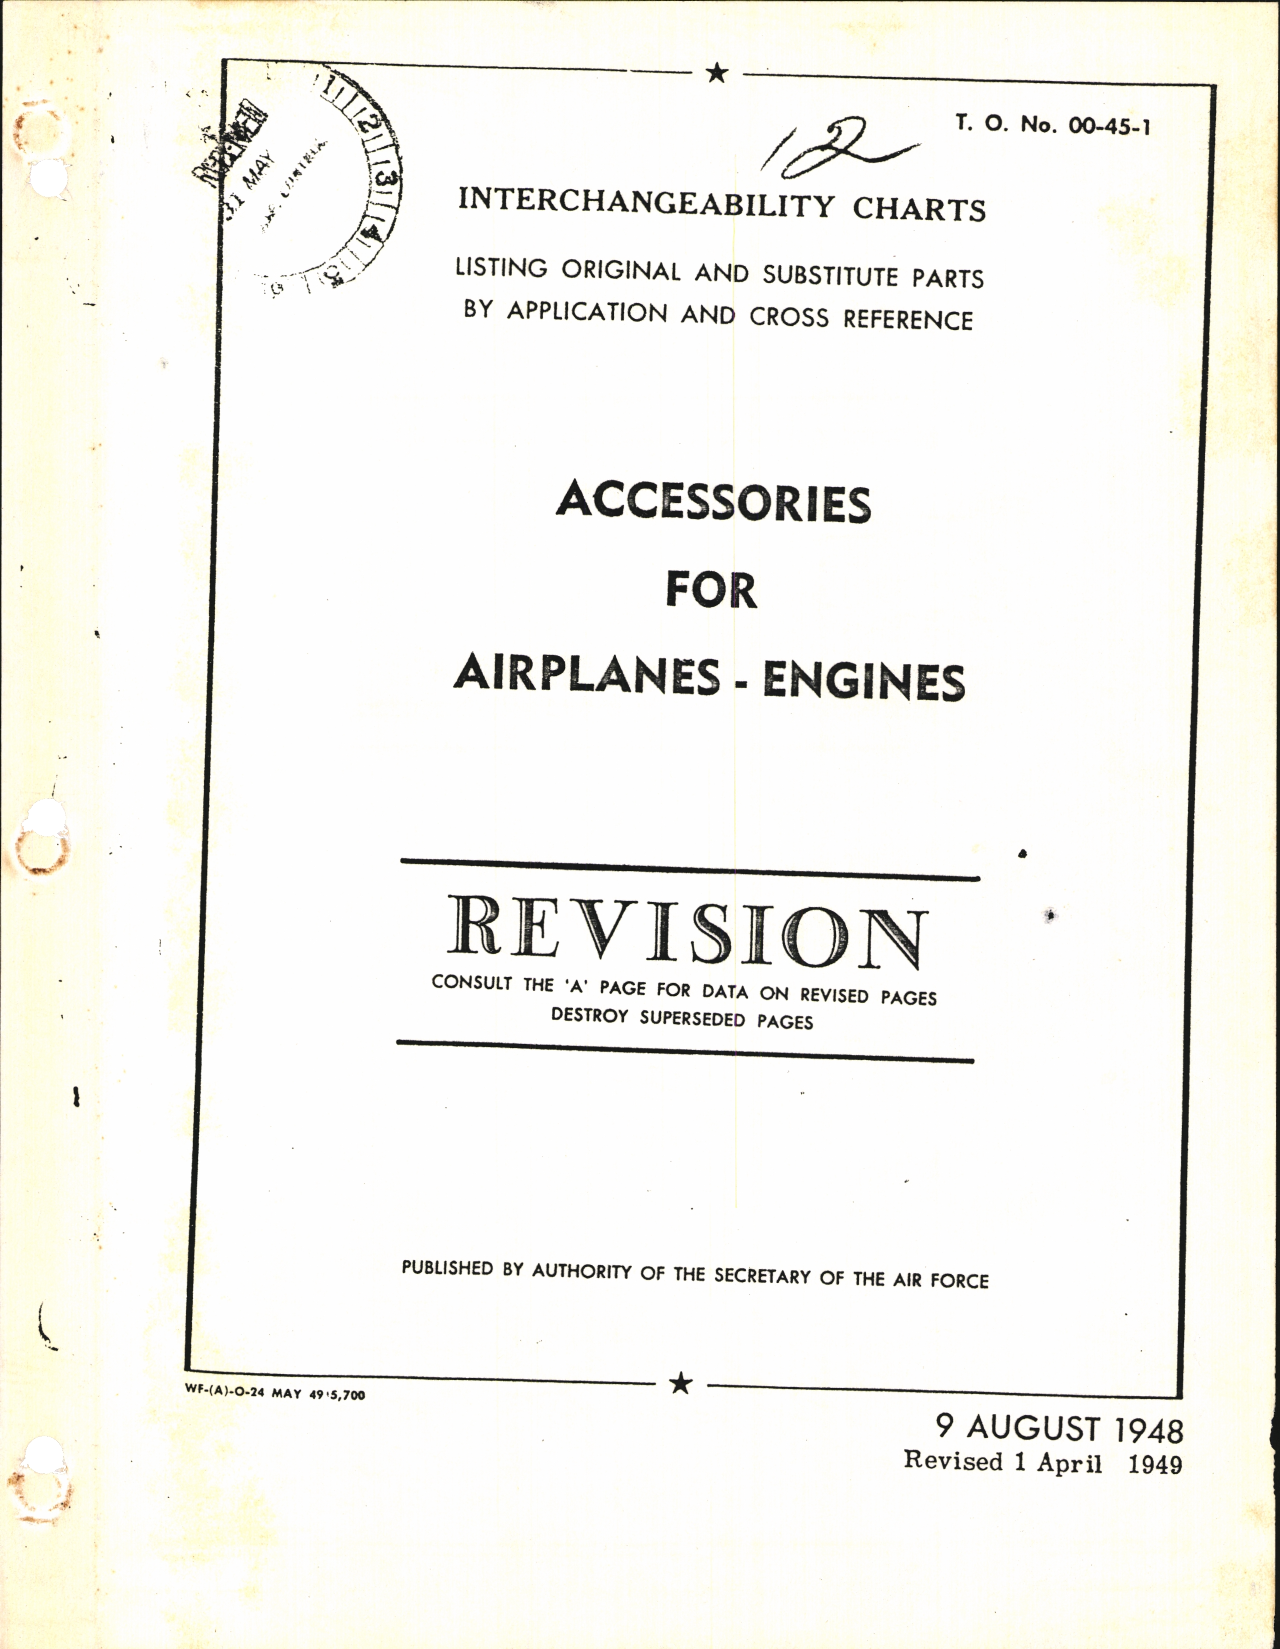 Sample page 1 from AirCorps Library document: Accessories for Airplanes; Engines Interchangeability Charts Listing Original and Substitute Parts by Application and Cross reference Charts